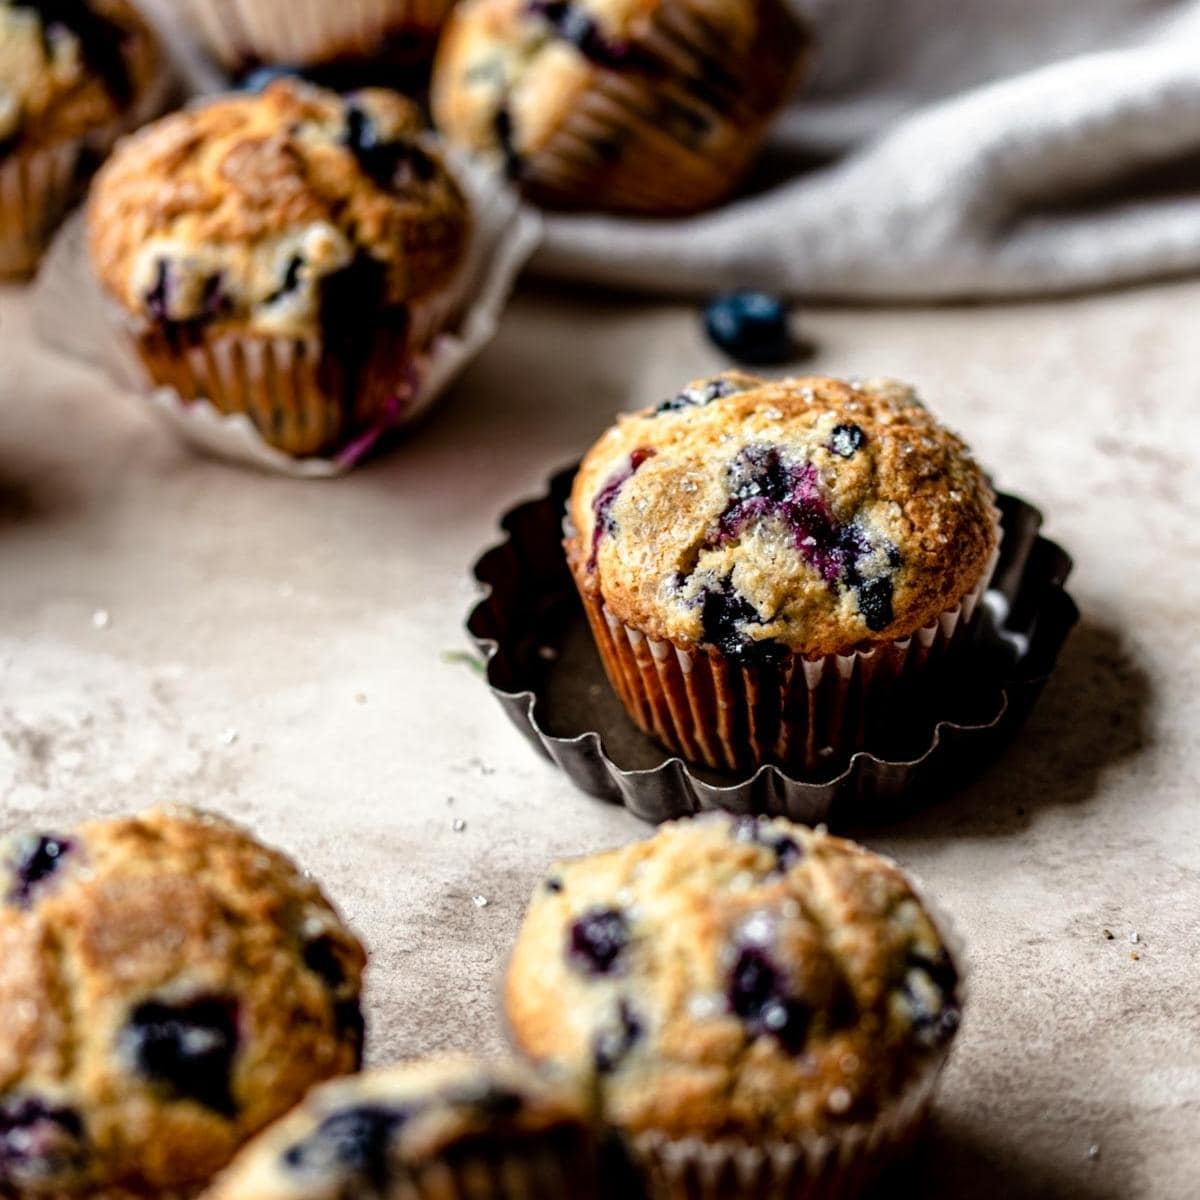 Blueberry muffins scattered on a brown table.